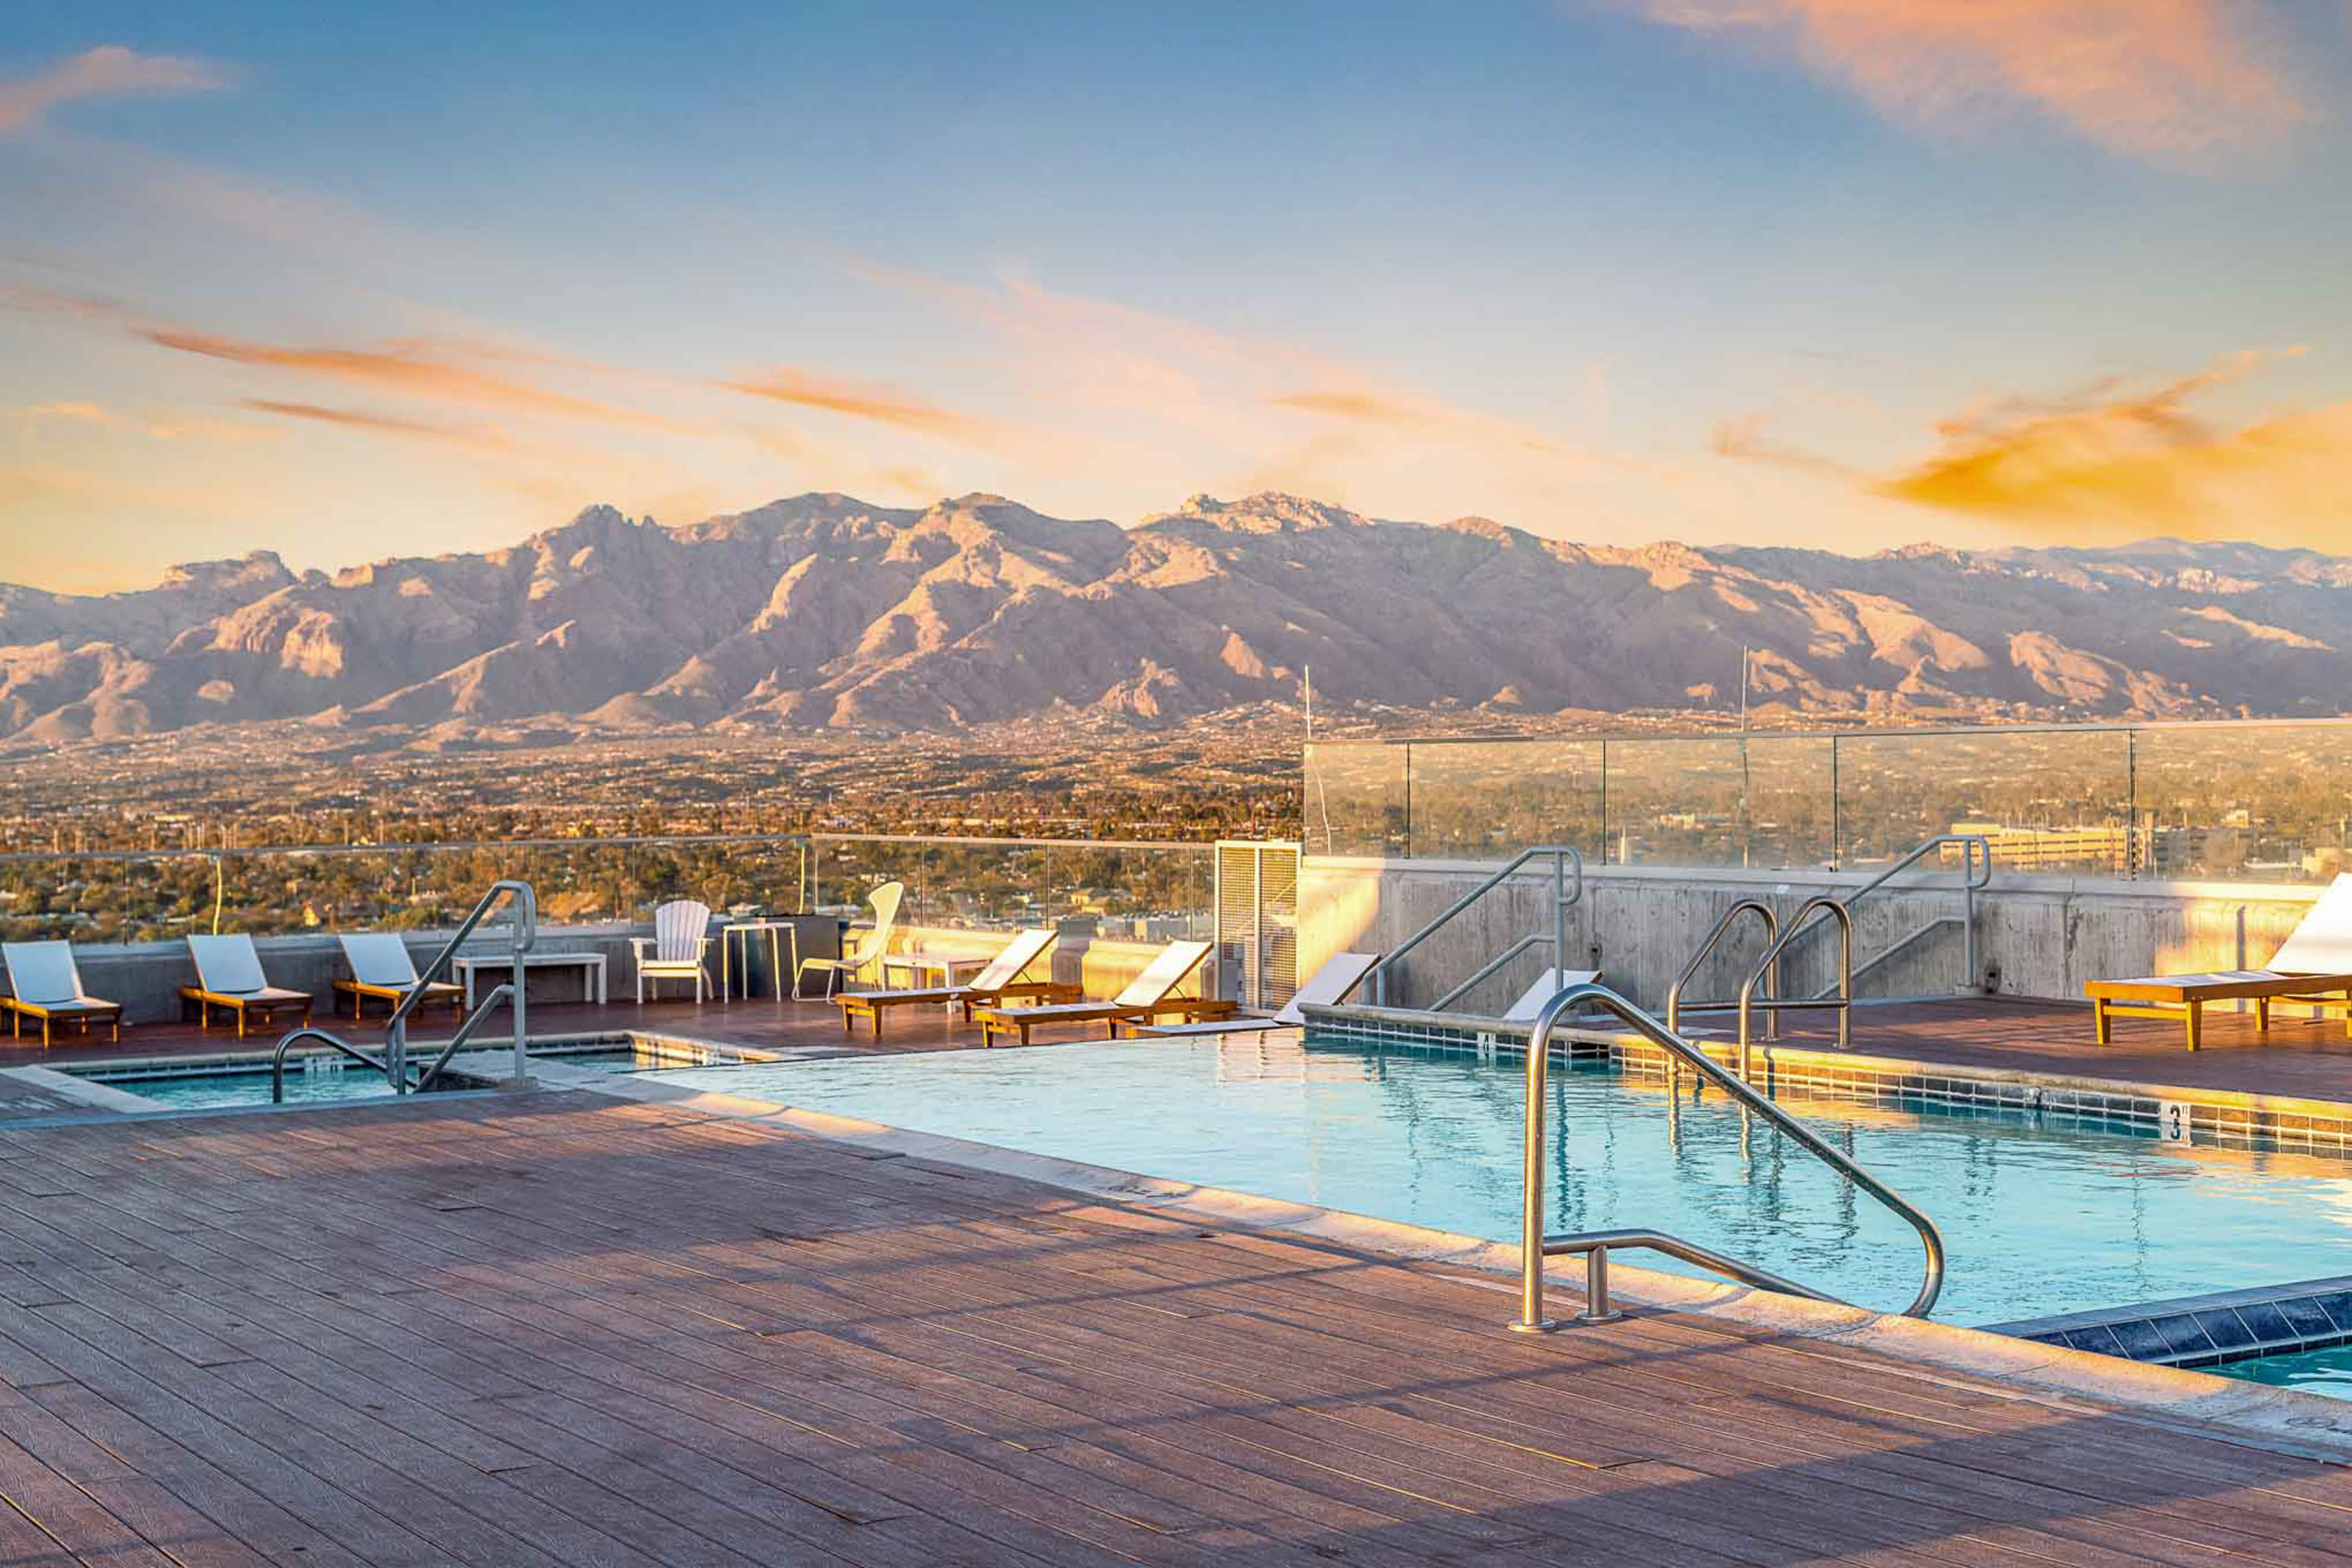 Large swimming pool overlooking the mountain at Sol y Luna in Tucson, Arizona